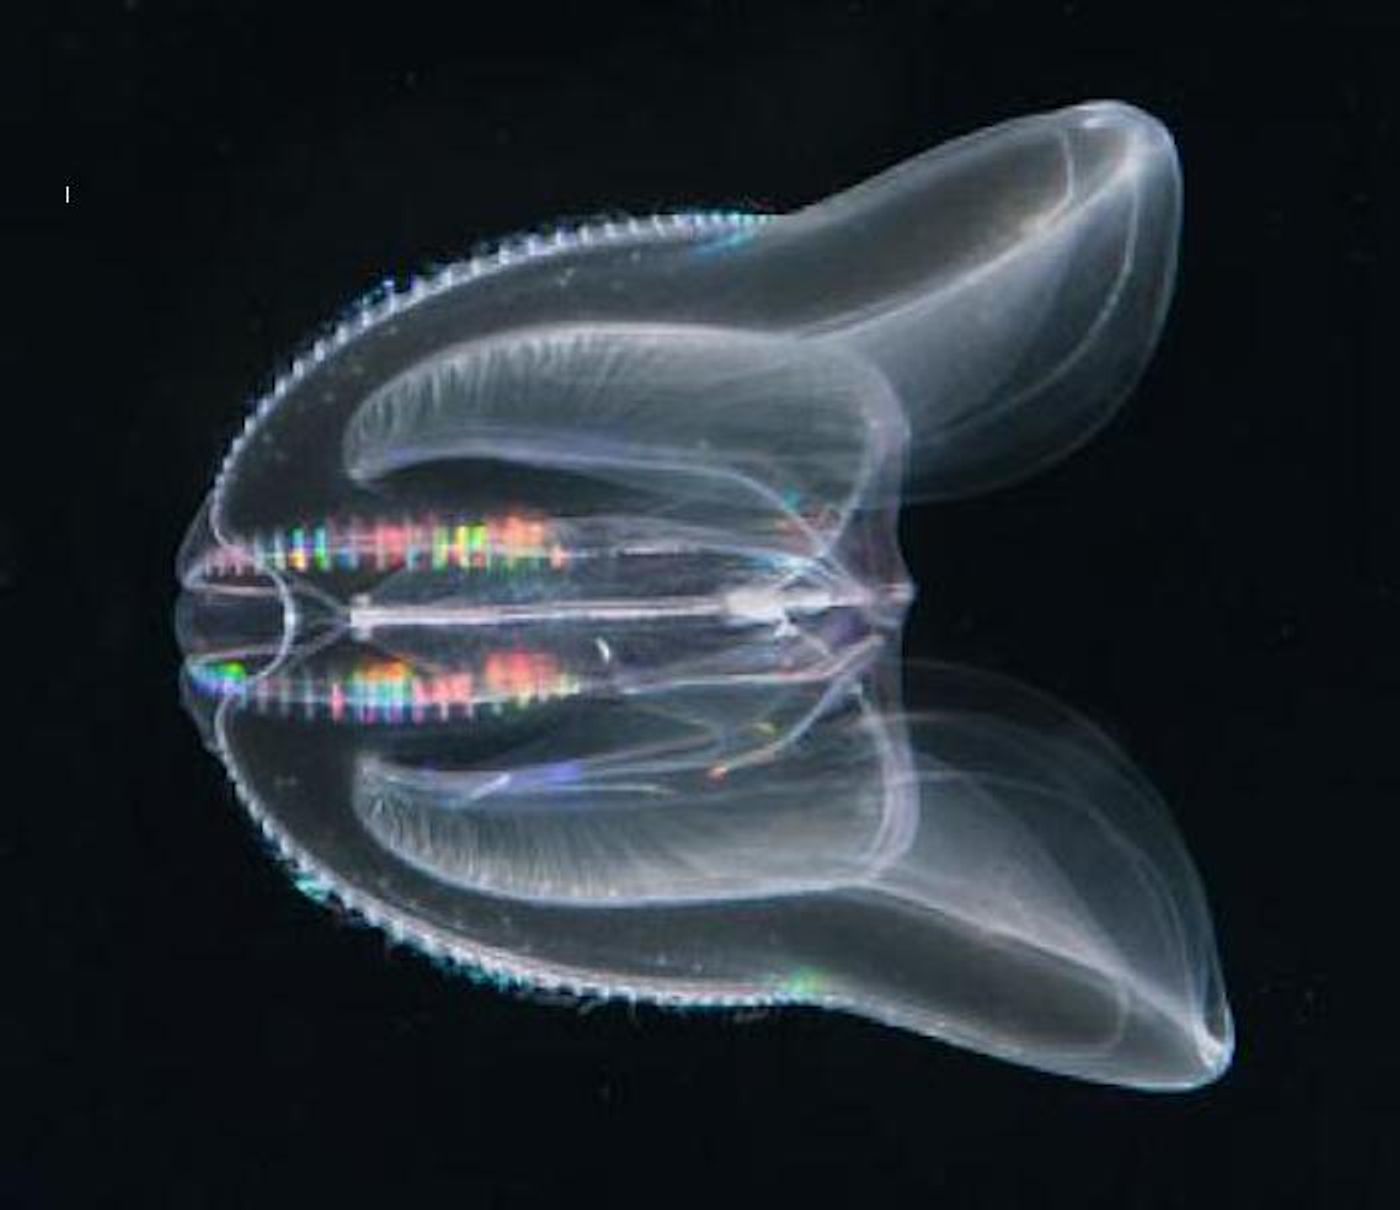 The North American comb jellyfish <i>Mnemiopsis leidyi</i> has a simple structure with two large oral lobes for catching prey. Credit  Lars Johan Hansson